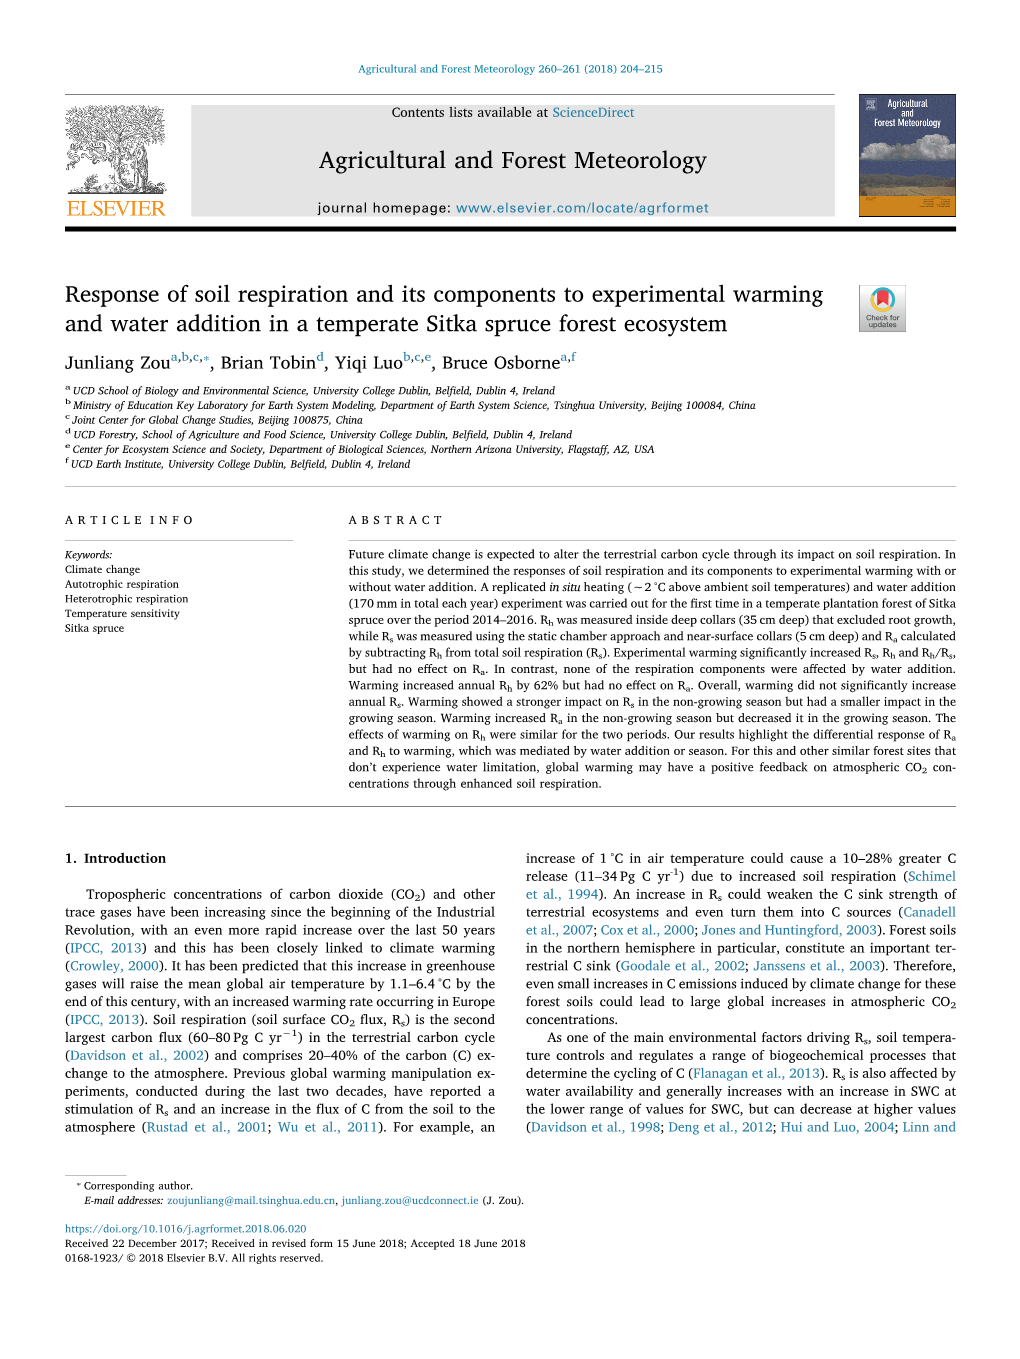 Response of Soil Respiration and Its Components to Experimental